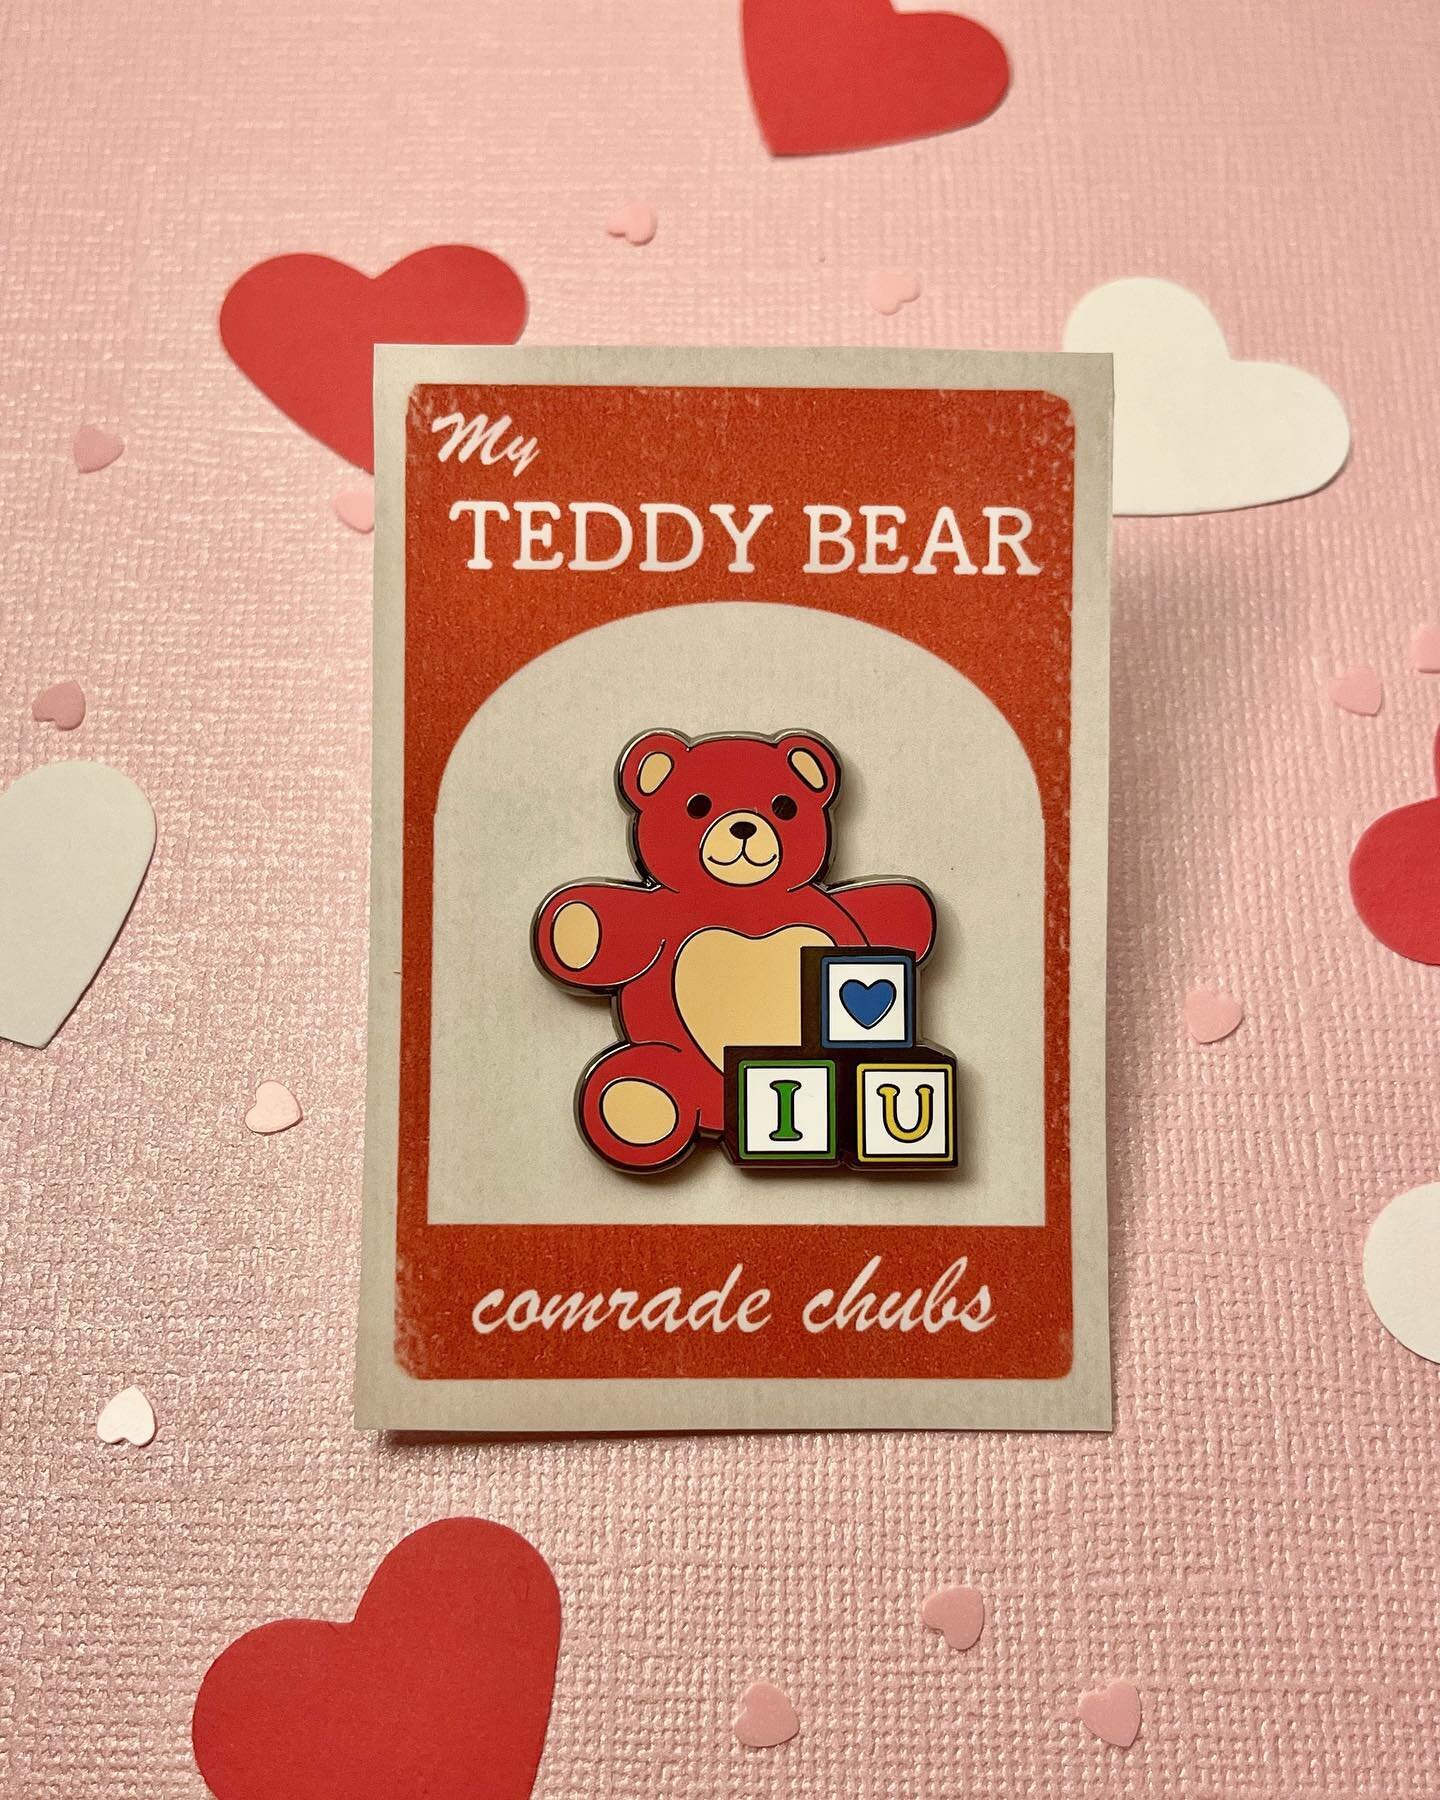 My pins finally came in! I haven&rsquo;t had my backings yet, so I had to improvise lately making homemade ones. This is my backing design, inspired by 1950s toy packaging. I hope you like it! I think it makes my pin really pop! Happy to be making th